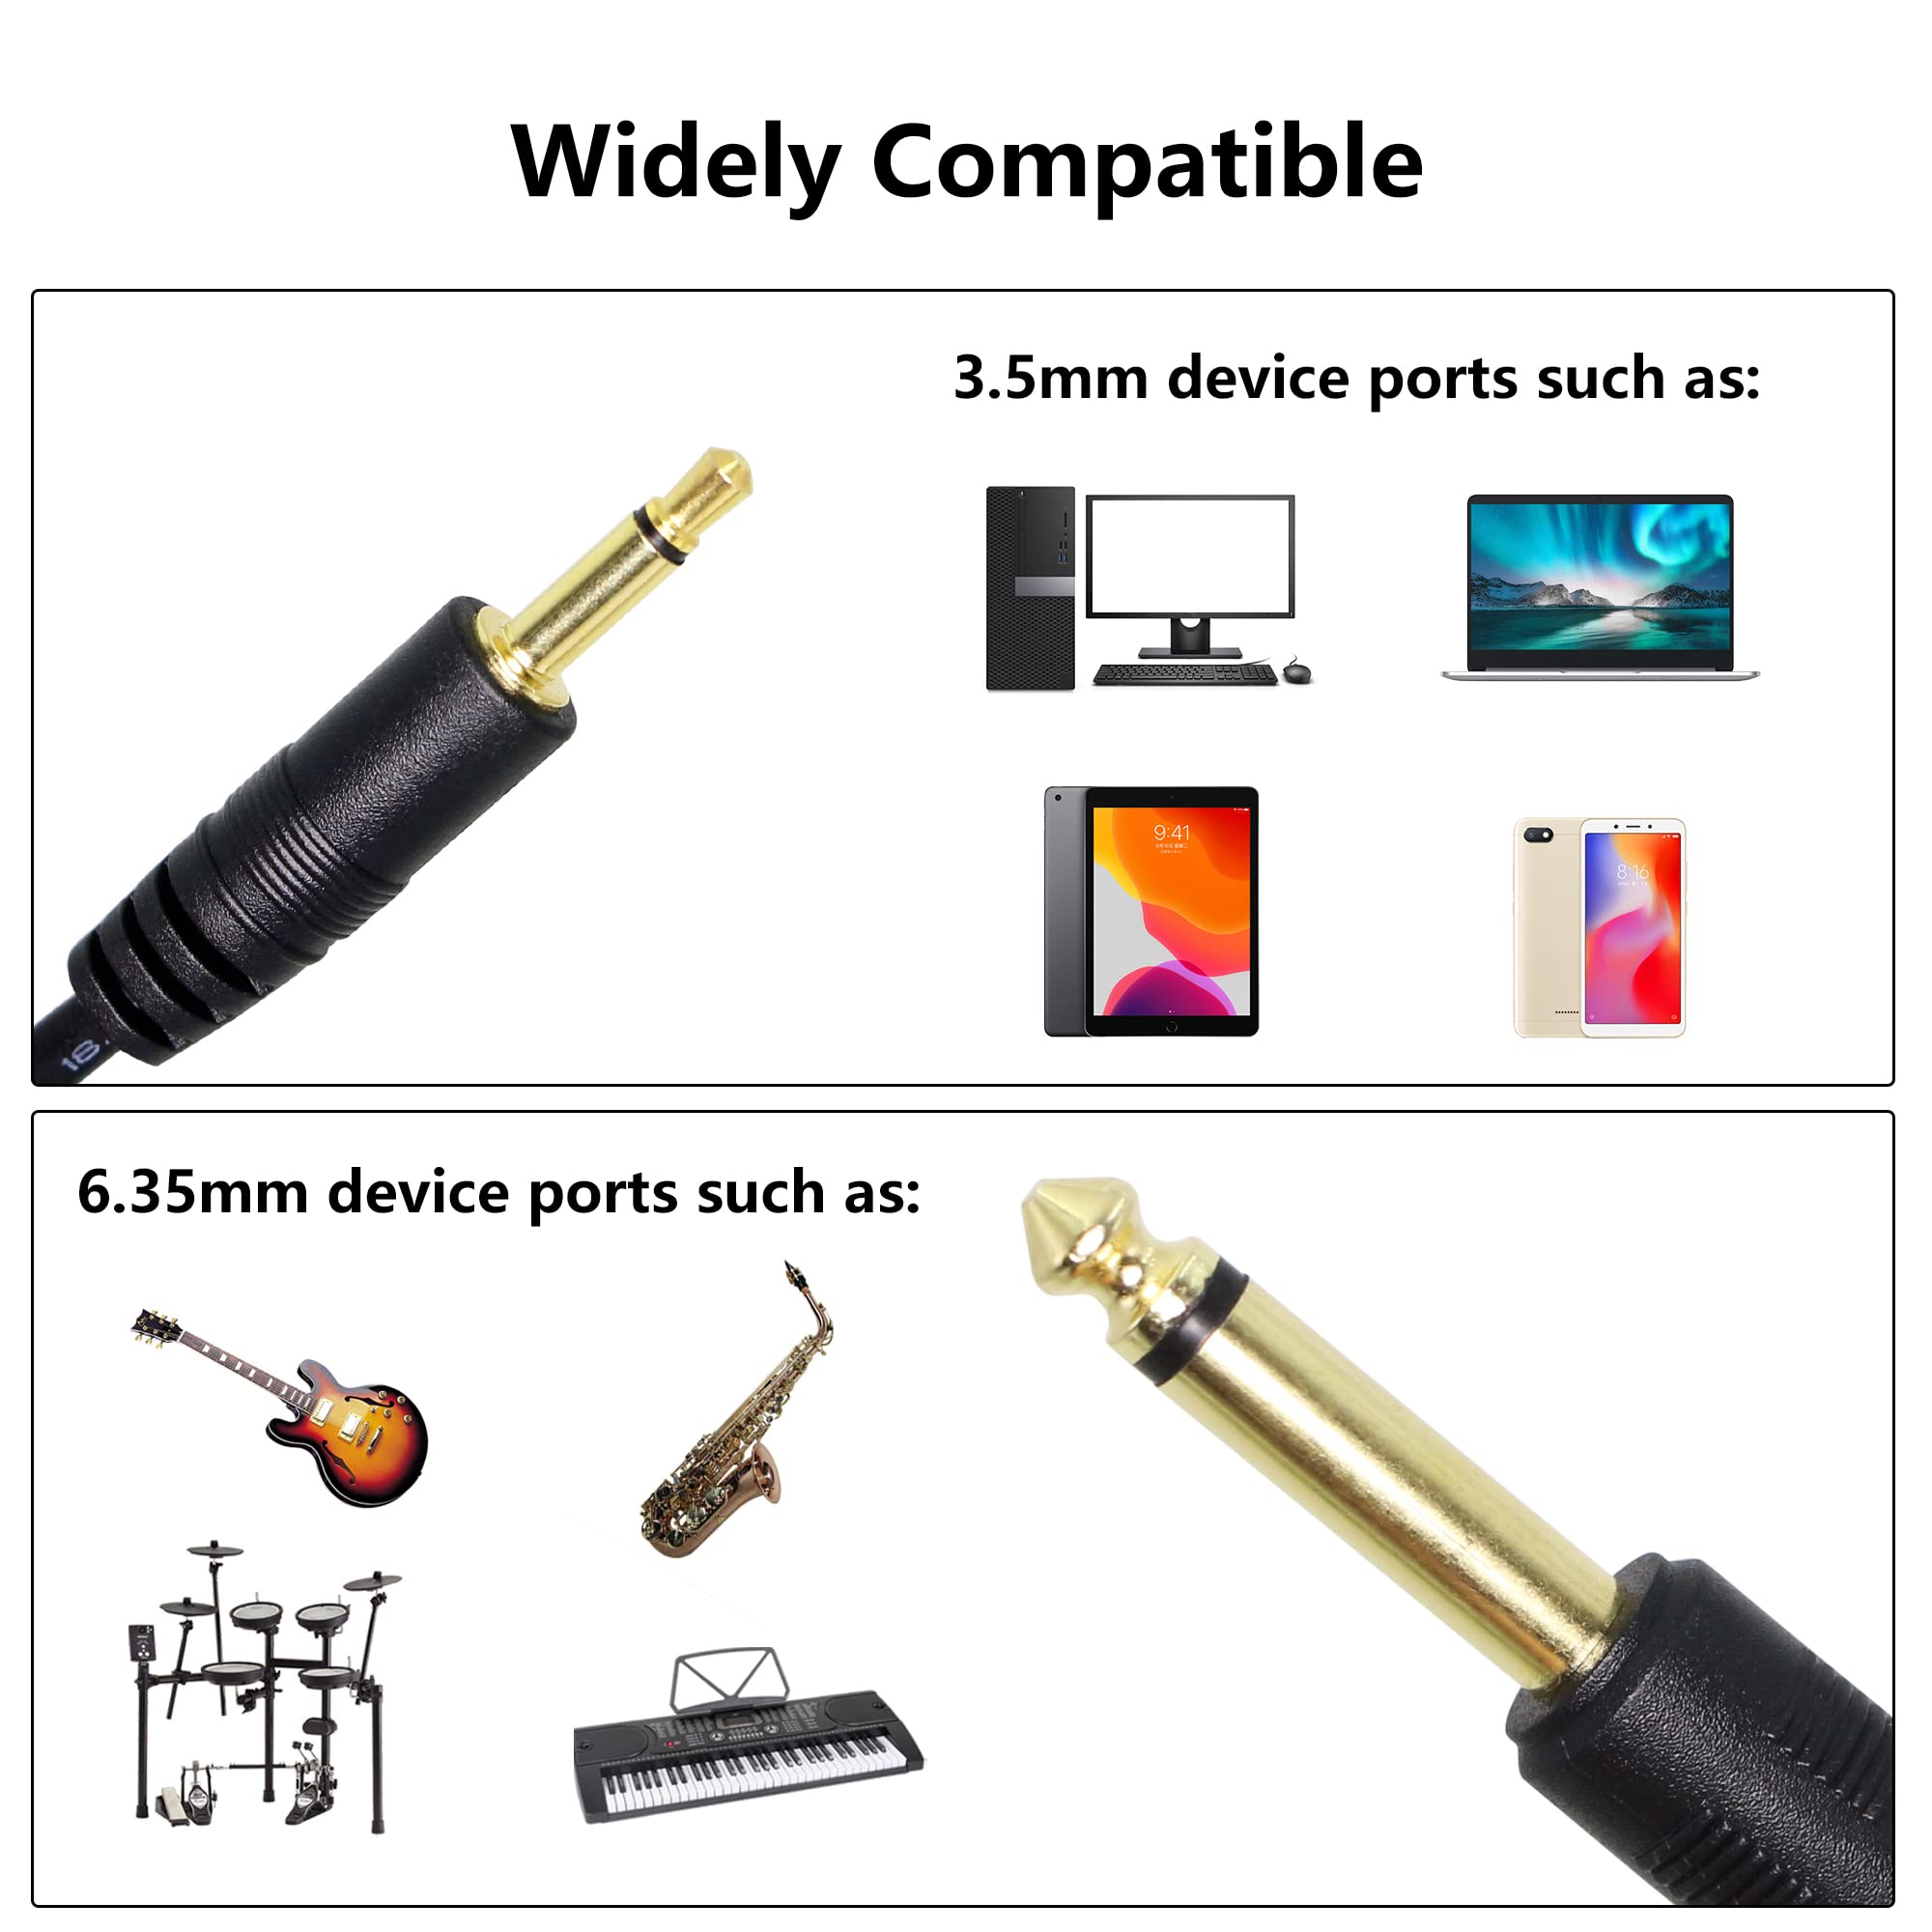 RIIEYOCA 1/8" to 1/4" TS Cable, Gold Plated 3.5mm Mono Male to 6.35mm Mono Male Audio Cable for Amplifier, Speaker,Guitar(2m/6.56ft)